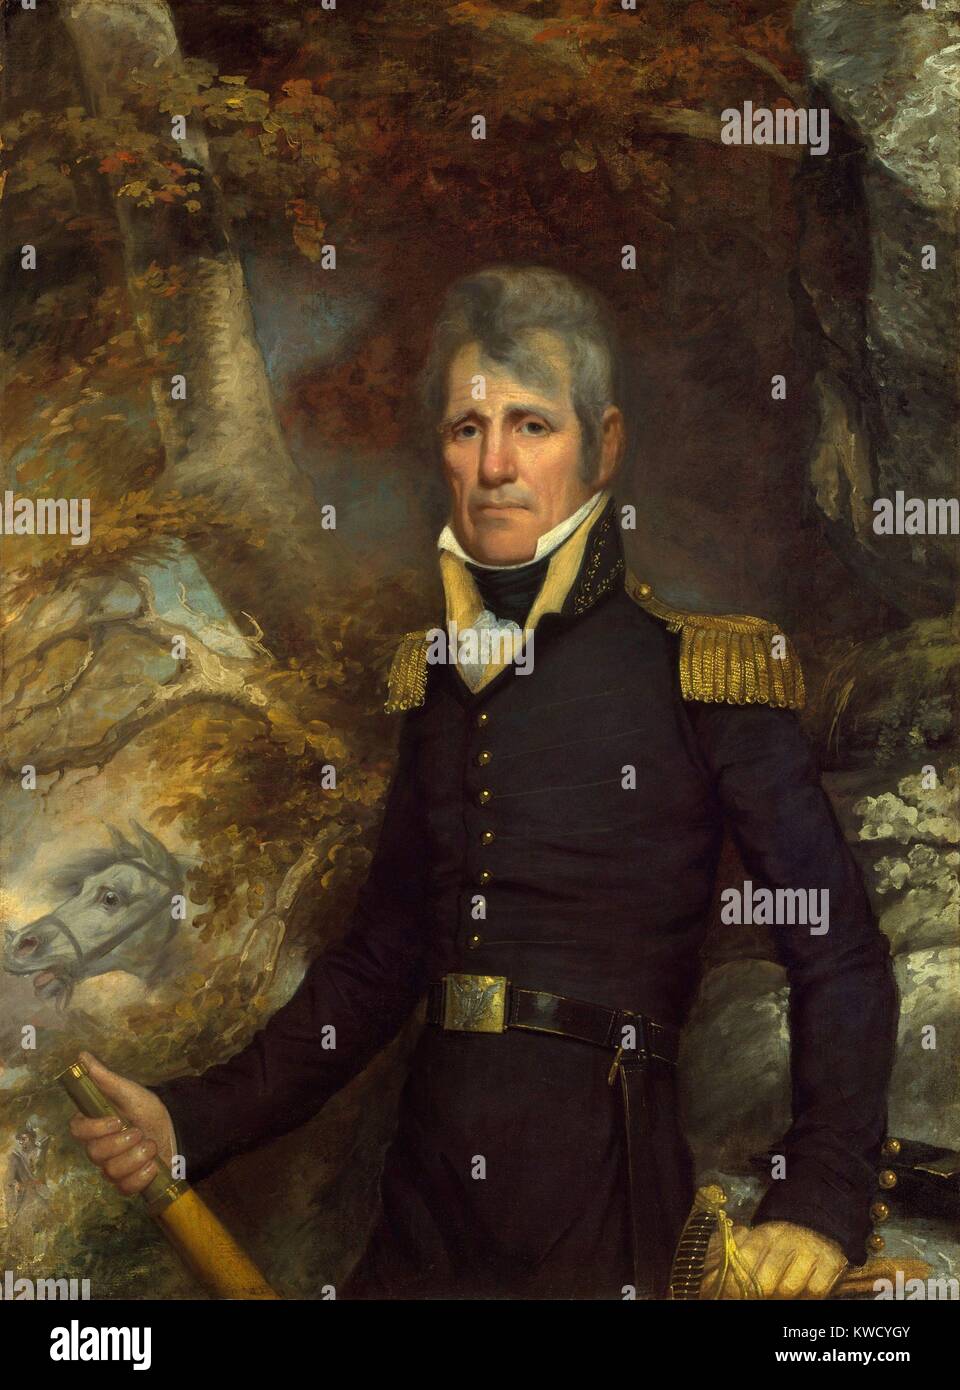 General Andrew Jackson in 1819 military portrait by John Wesley Jarvis. This portrait was painted in New York in 1819, when Jackson was celebrated as the hero of the War of 1812. Jackson commissioned this portrait from Jarvis, who painted at least seven additional Jackson portraits. Samuel Swartwout vouched for the accuracy of the likeness, when he wrote, I have just been to see Jarviss portrait of you. It is inimitable (BSLOC 2017 6 1) Stock Photo